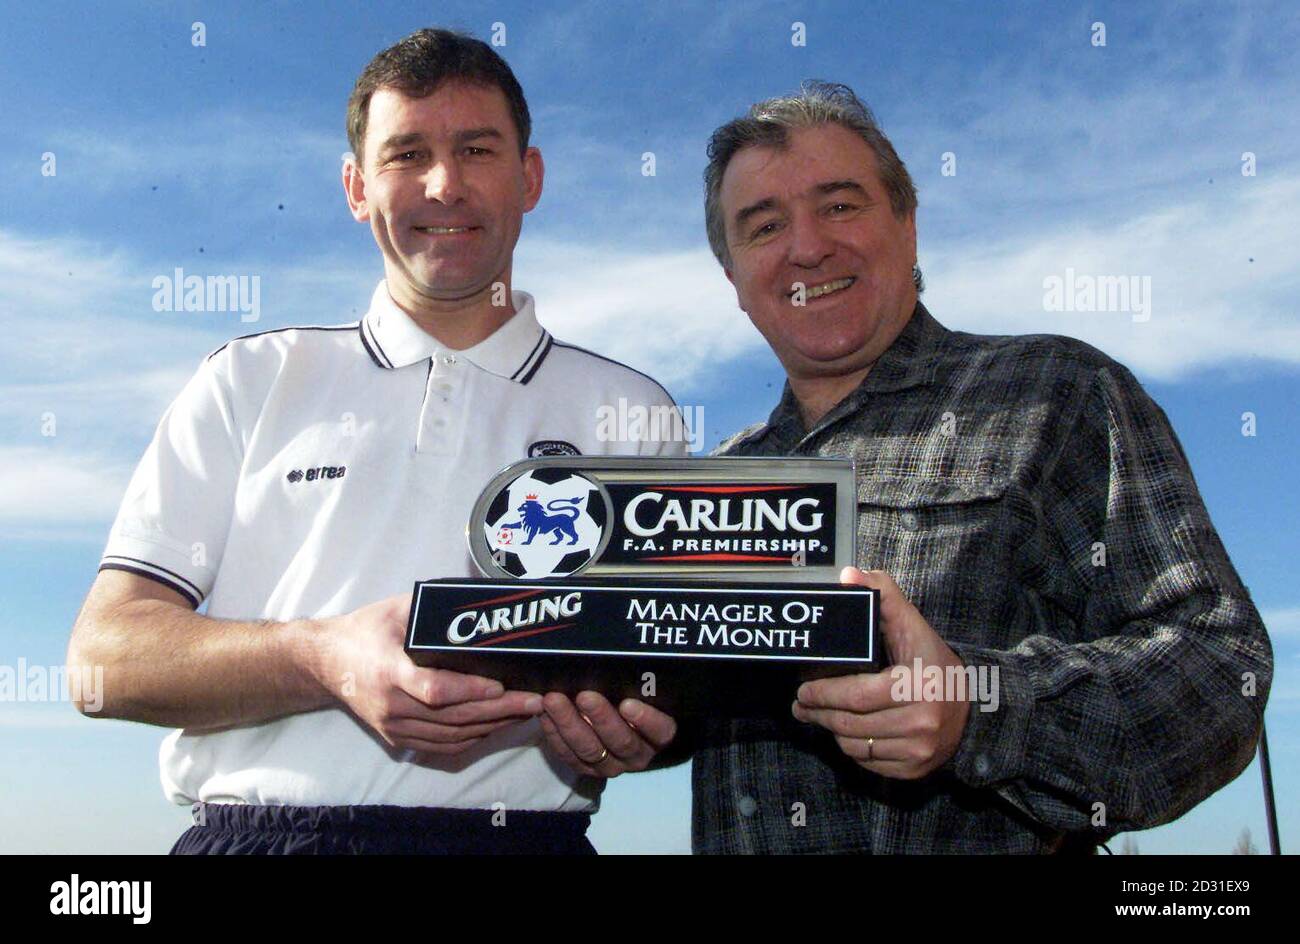 Middlesbrough head coach Terry Venables (right) and club manager Bryan Robson receive the Carling Manager of the Month award for January after sparking a major revival at Middlesbrough.  * The 57-year-old, officially head coach to Riverside boss Bryan Robson, has put together an 11-game unbeaten run to drag the Teessiders out of the Premiership relegation zone. Stock Photo